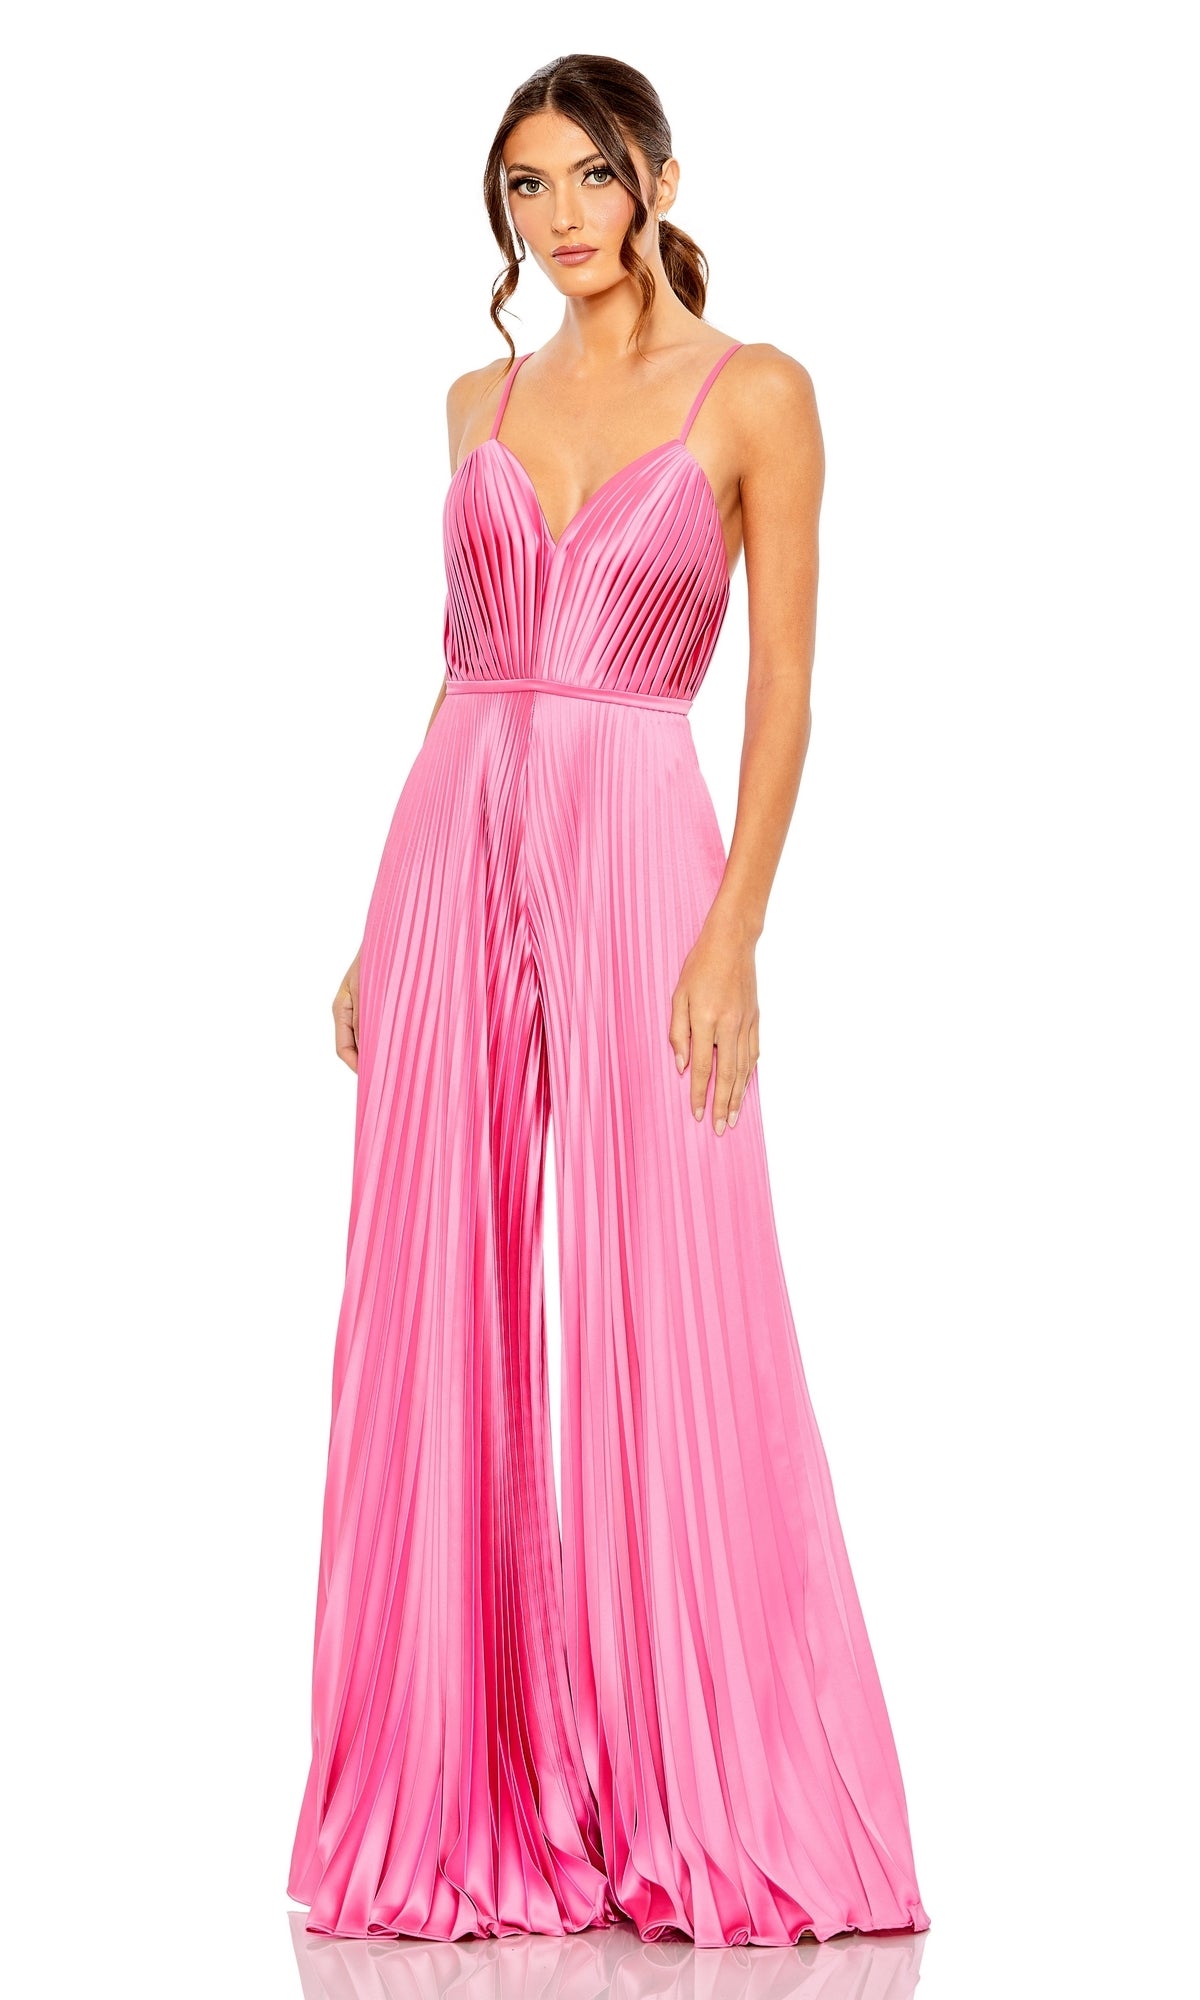 Pleated Formal Jumpsuit 26319 by Mac Duggal